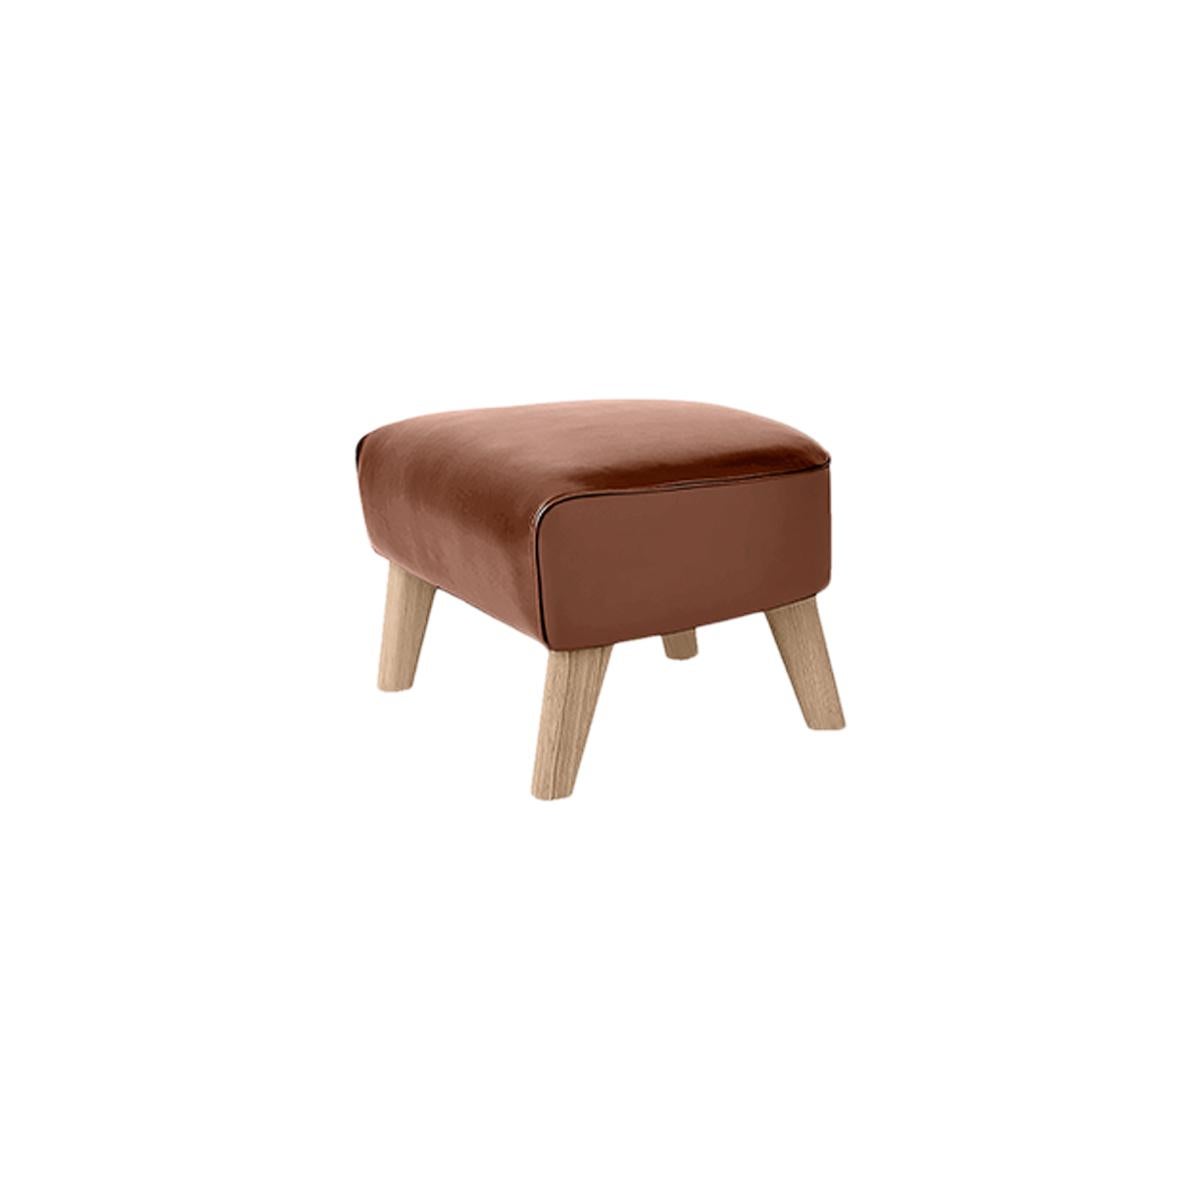 Brown Leather and Natural Oak My Own Chair Footstool by Lassen
Dimensions: W 56 x D 58 x H 40 cm 
Materials: Leather

The My Own Chair Footstool has been designed in the same spirit as Flemming Lassen’s original iconic chair, reflecting his love